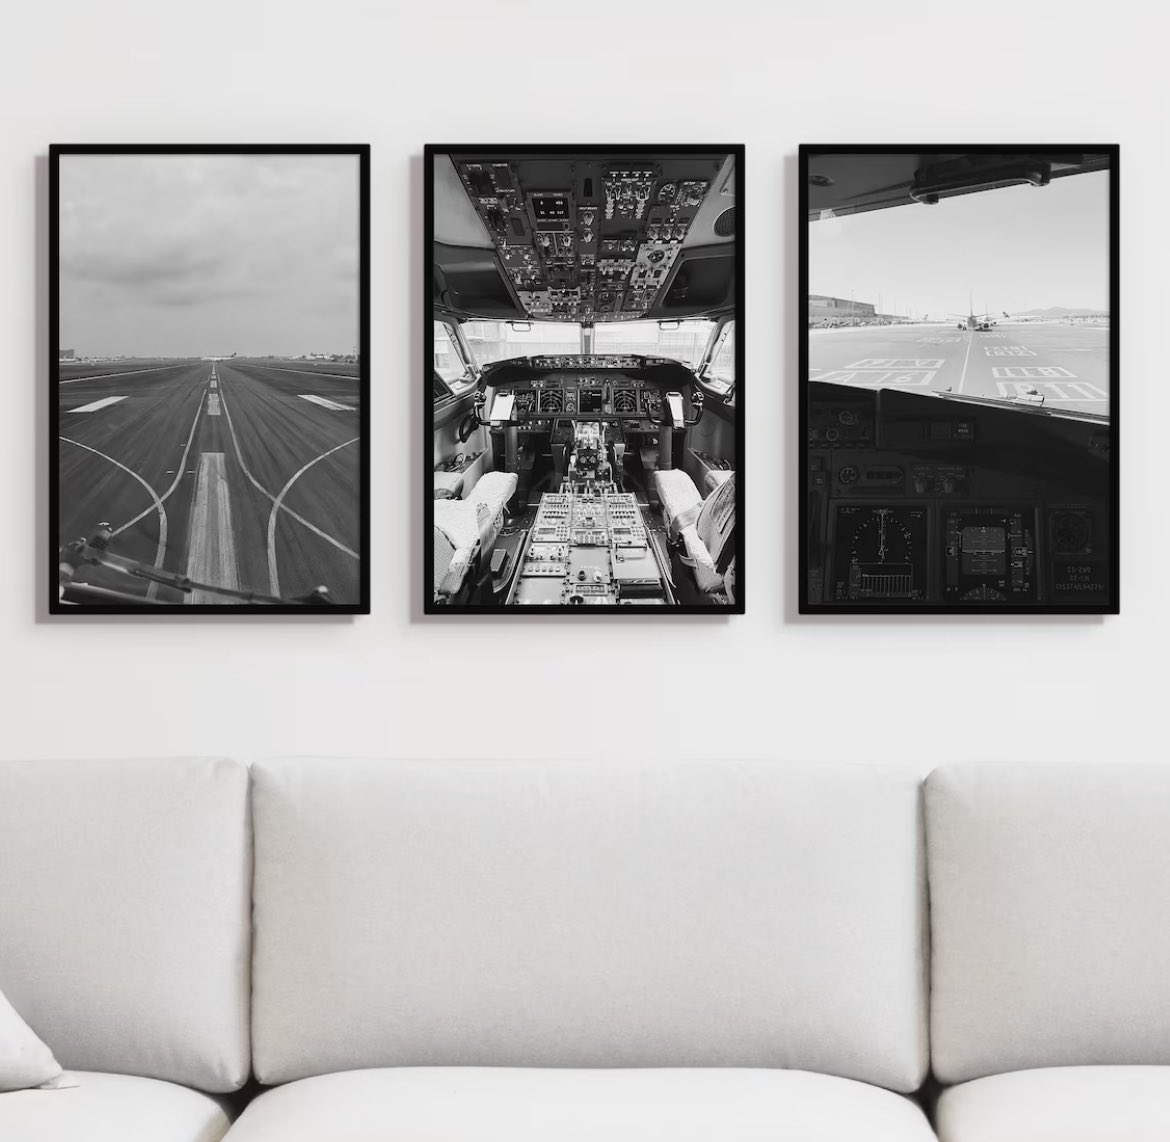 Sets of 3 are available at the Paperplane.D Store on ETSY. More sets coming soon.  etsy.com/listing/162323… #monochcrome #photograghy #aviationphotography #digitalprints #aviationdaily